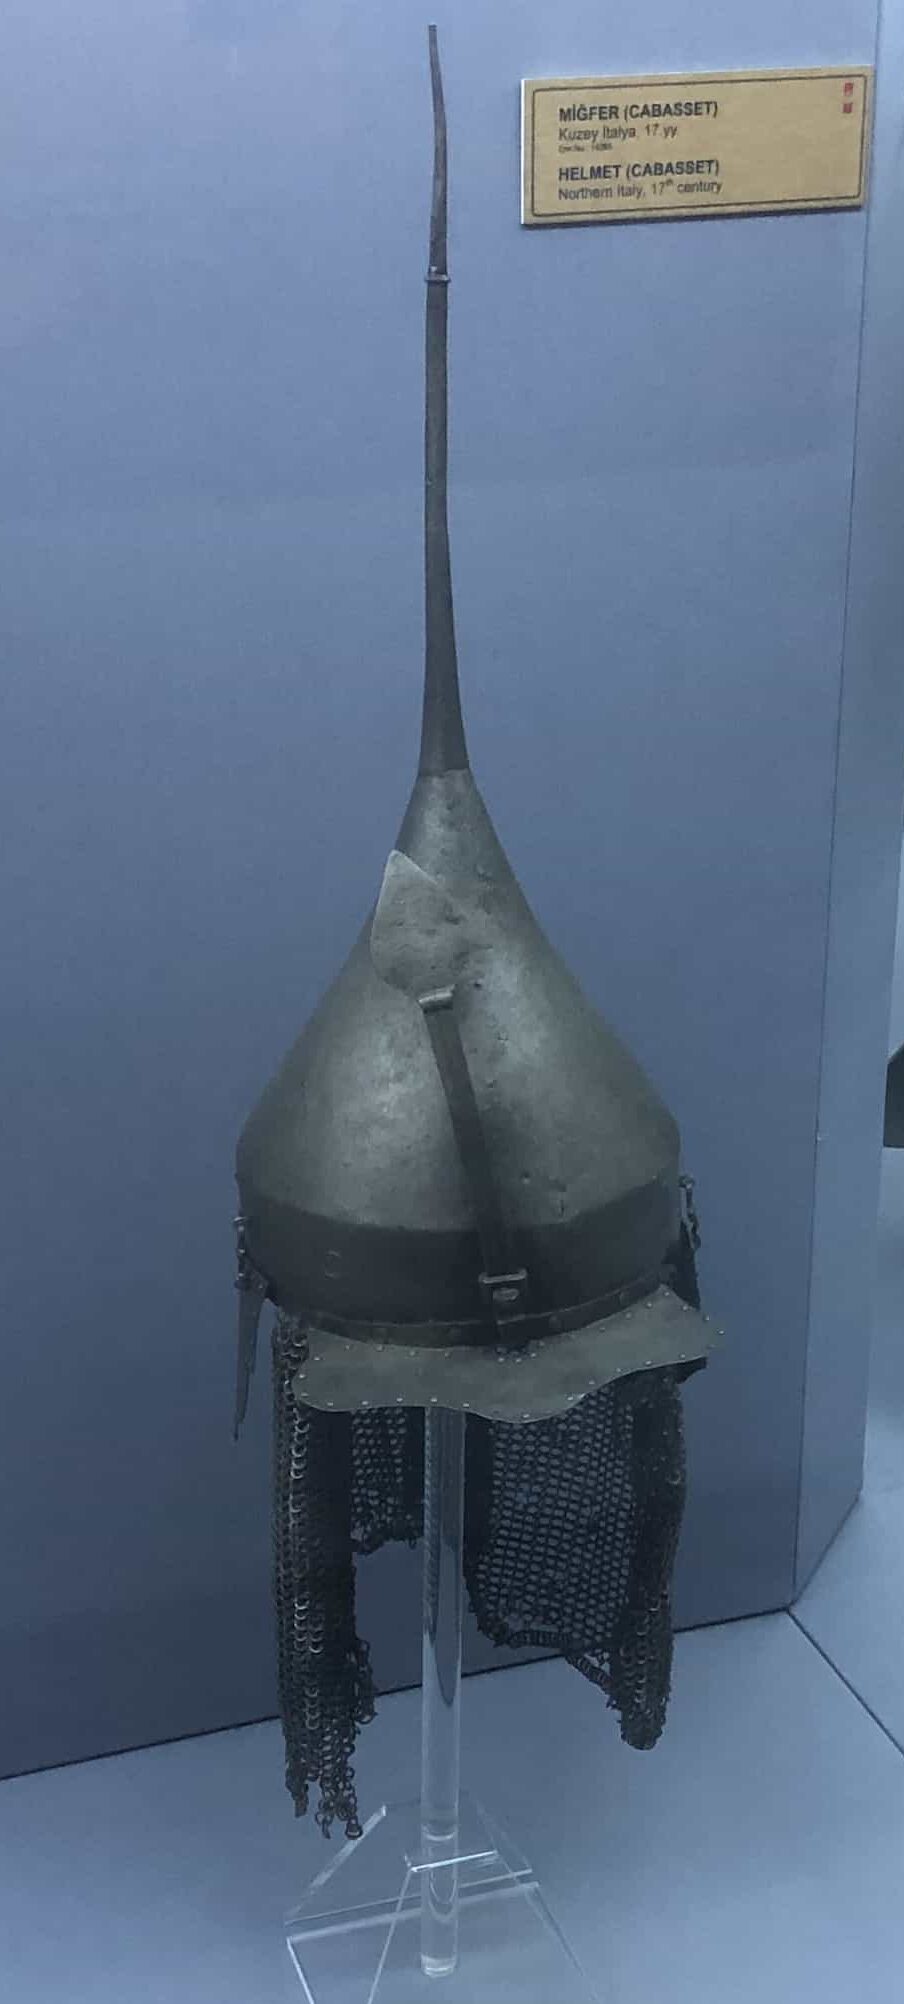 Russian helmet (17th century) in Defence Weapons Hall 1 at the Harbiye Military Museum in Istanbul, Turkey